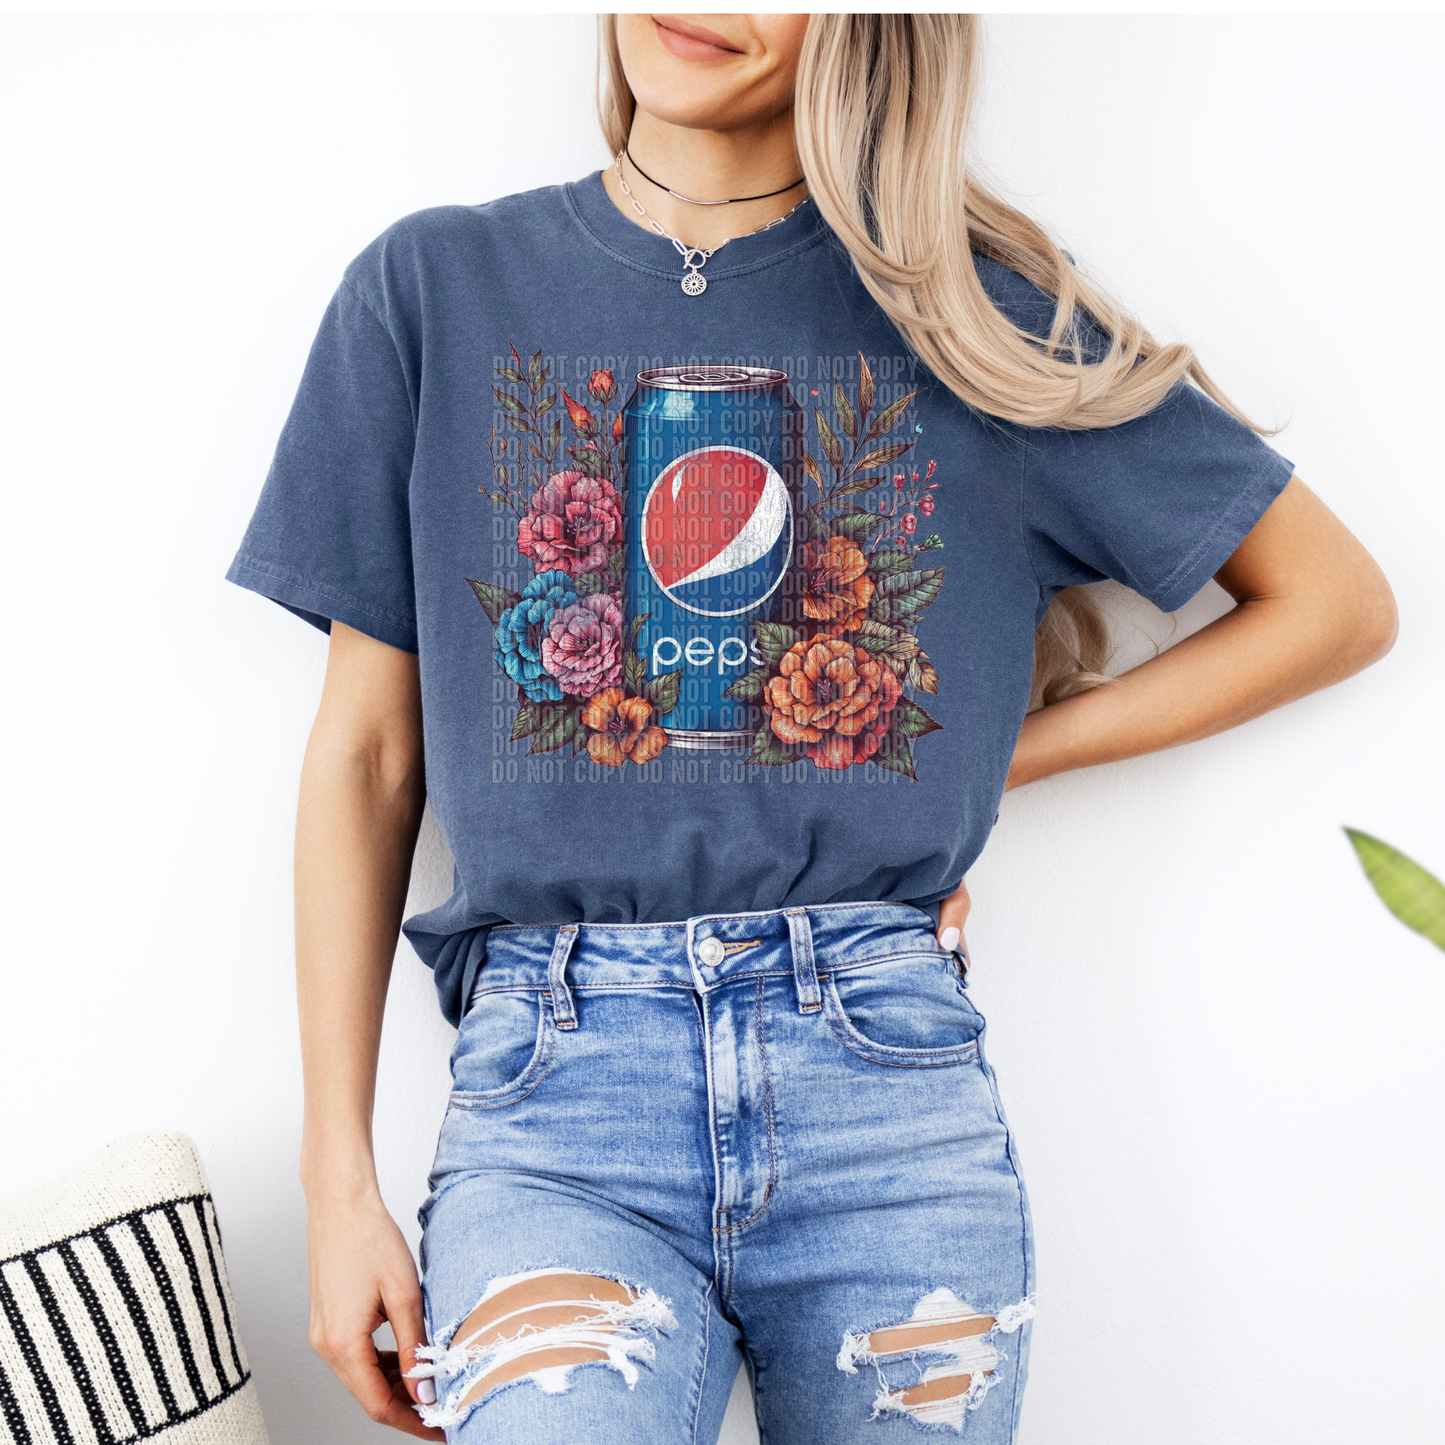 Pepsi with Flowers